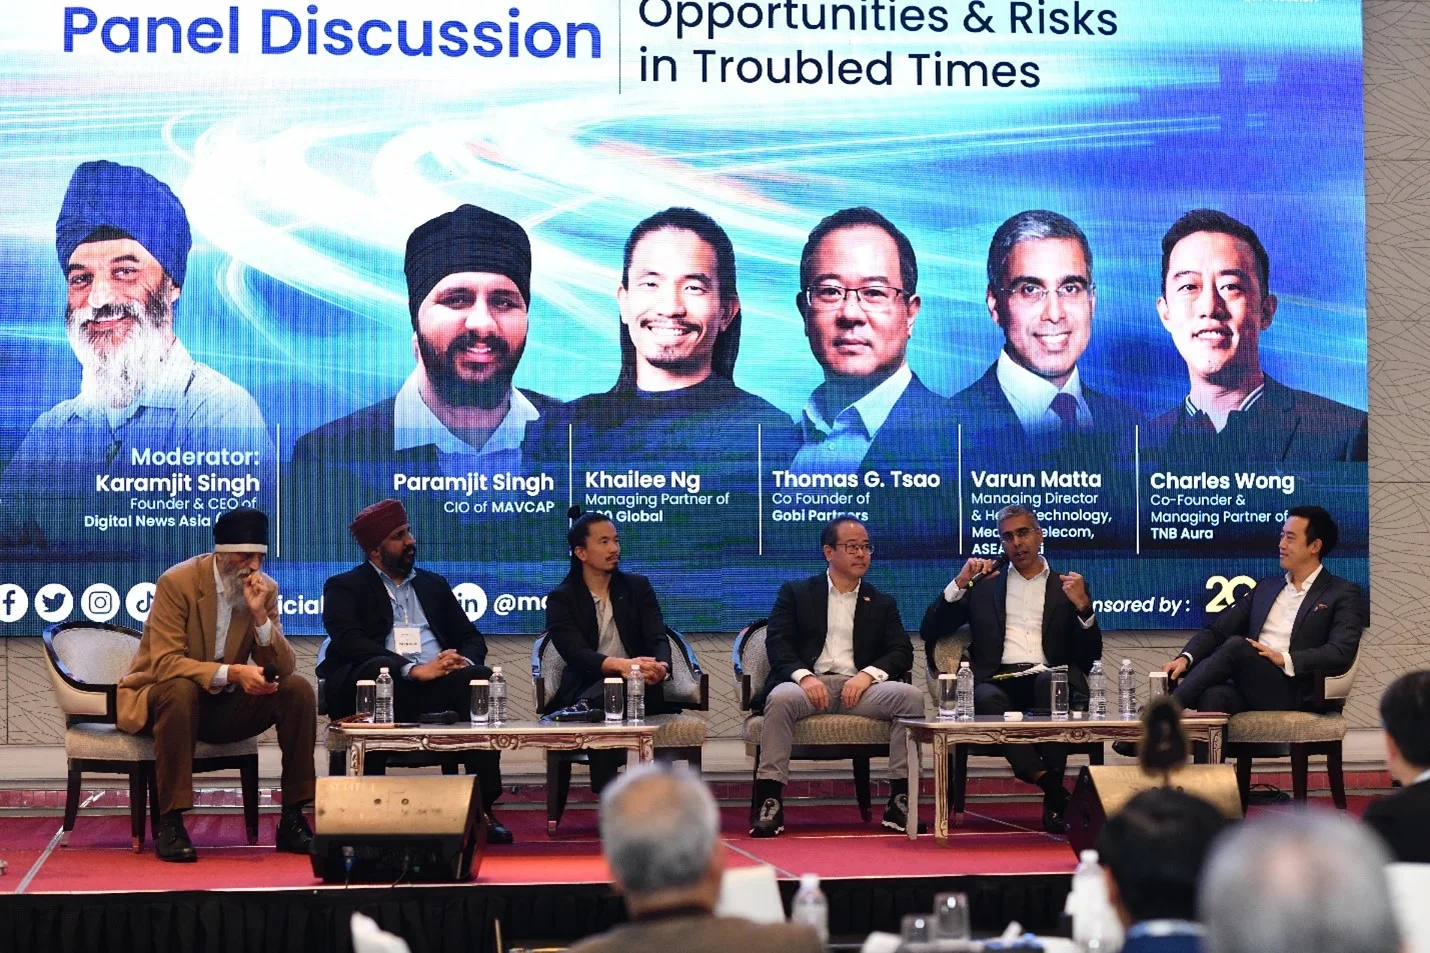 Panel Speakers From left to right: Karamjit Singh, Founder & CEO of Digital News Asia (DNA). Paramjit Singh, CIO of MAVCAP. Khailee NG, Managing Partner of 500 Global. Thomas G.Tsao, Co-Founder of Gobi Partners. Varun Matta, Managing Director, Investment Banking - Head, Technology, Media & Telecom and Financial Sponsors, Asean Citi. Charles Wong, Co-Founder & Managing Partner of TNB Aura